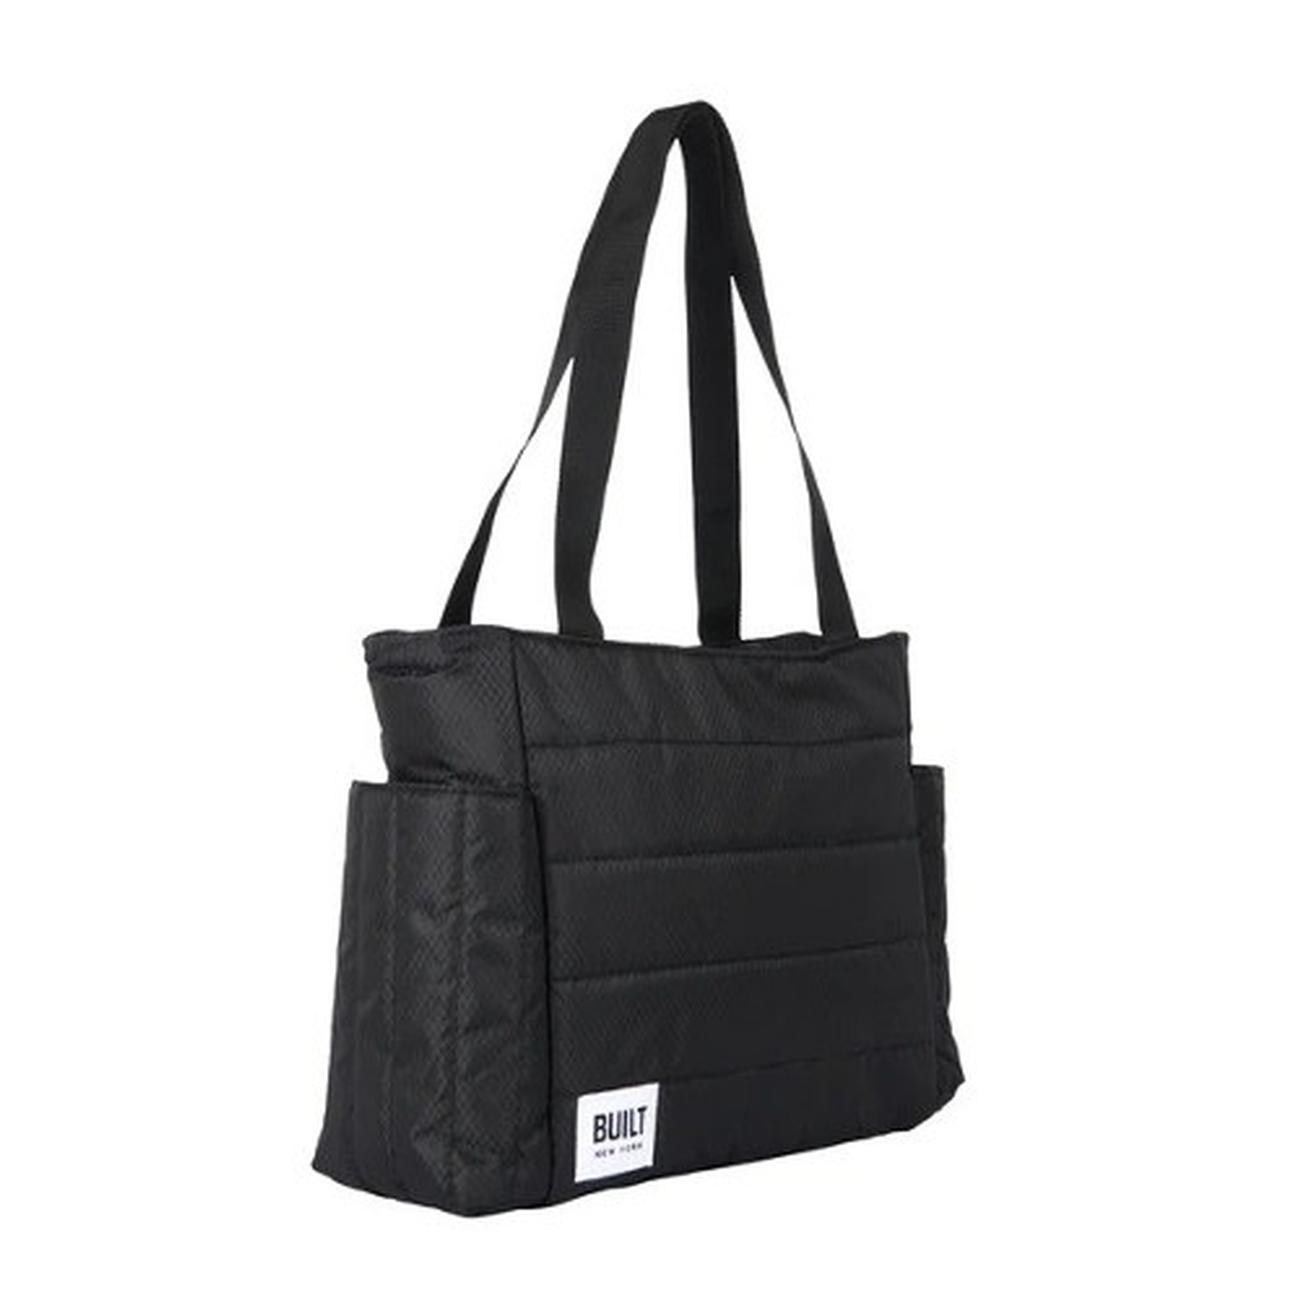 built-puffer-insulated-lunch-tote-black - Built Puffer Insulated Lunch Tote Bag-Black